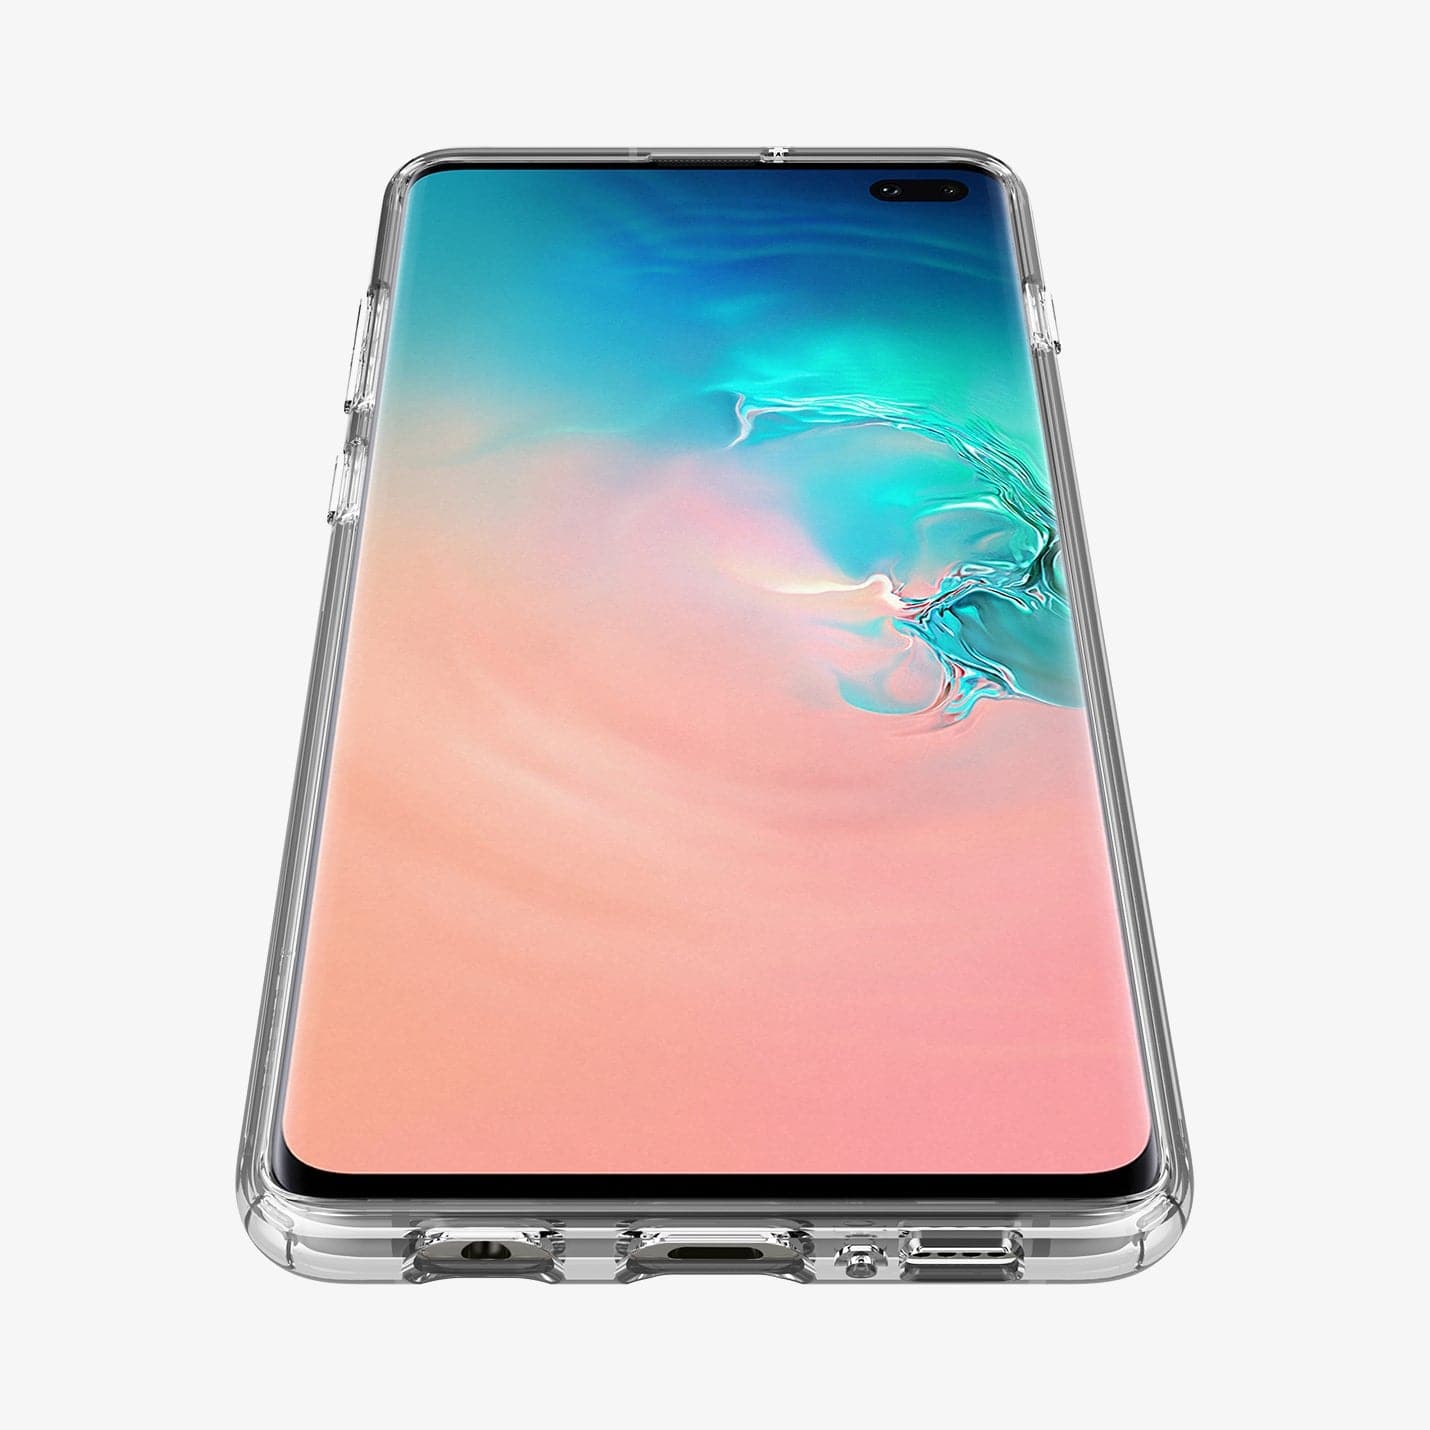 606CS25766 - Galaxy S10 Plus Ultra Hybrid Case in crystal clear showing the front and bottom zoomed in